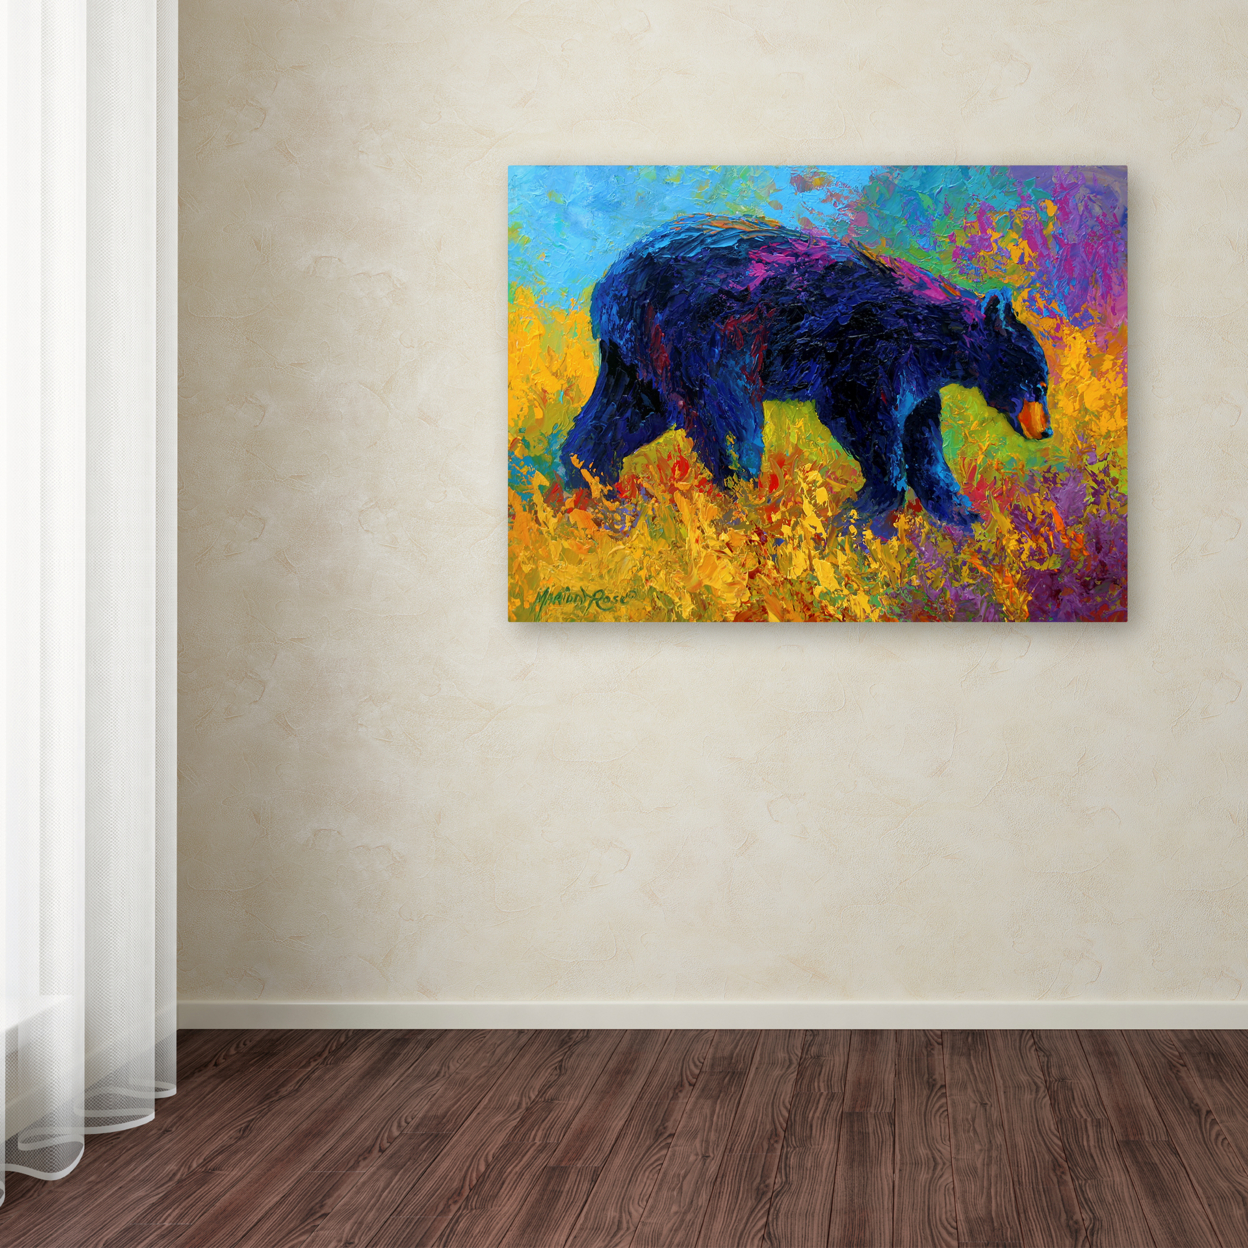 Marion Rose 'Young Restless II Black Bear Big' Ready To Hang Canvas Art 24 X 32 Inches Made In USA